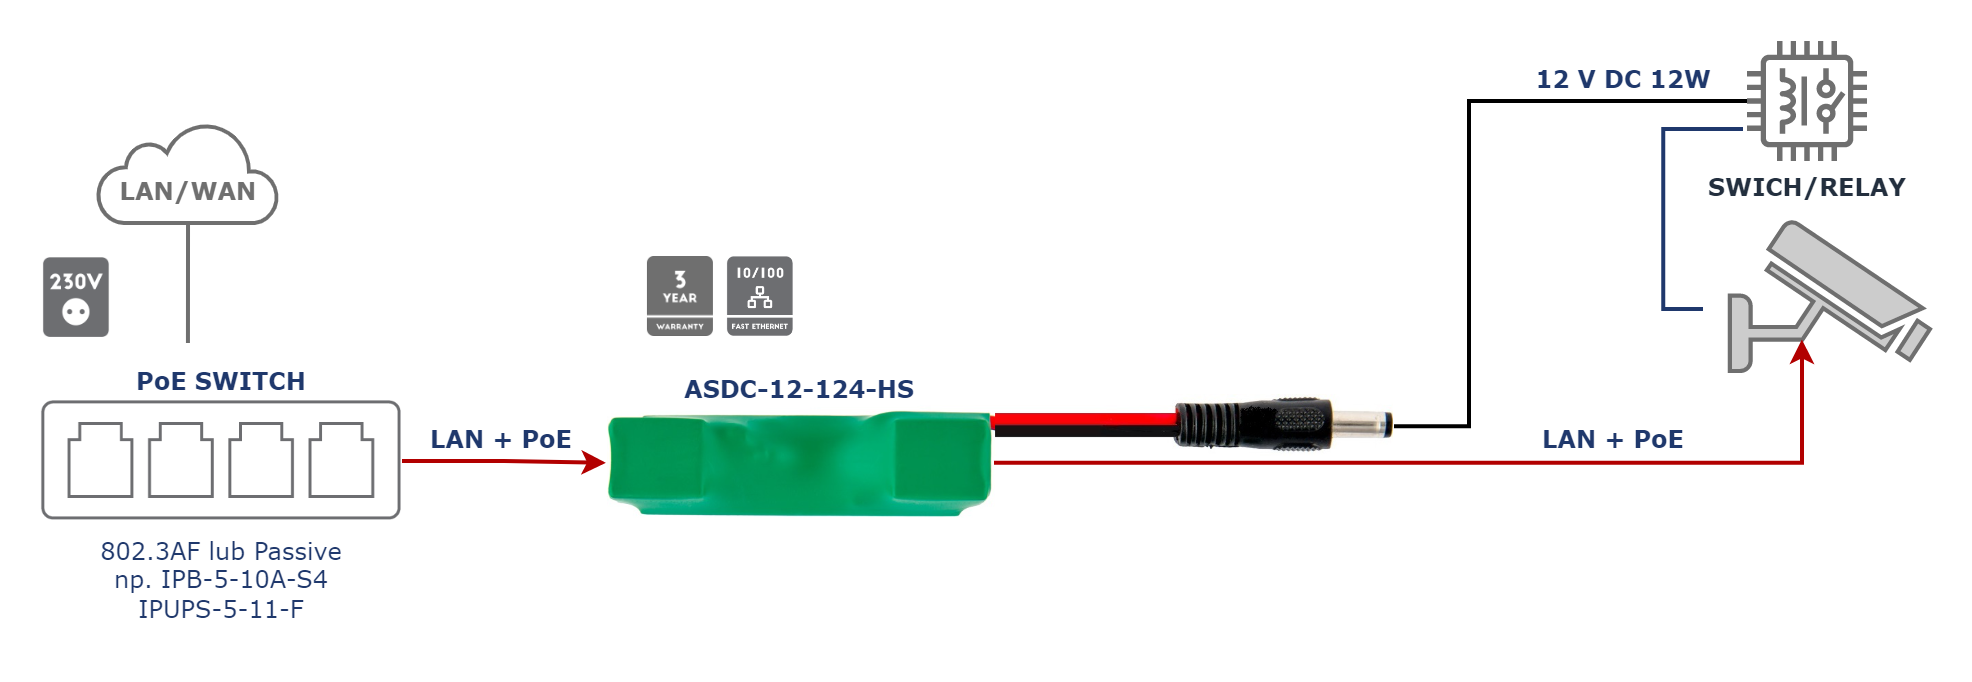 ASDC-12-124-HS_Relay.png